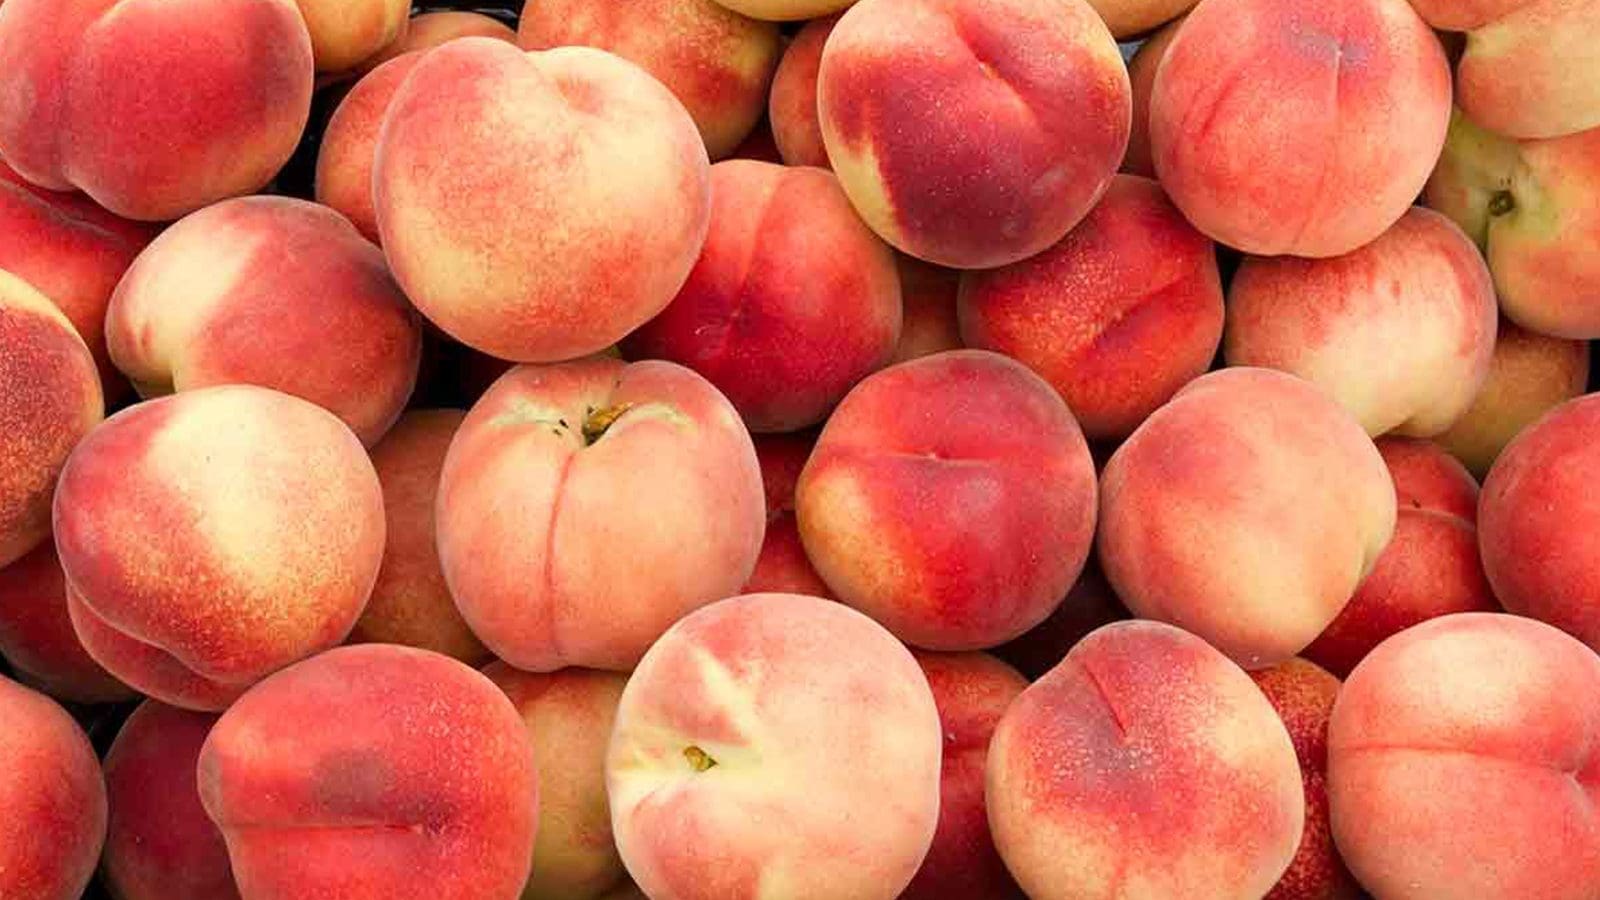 Center for Produce Safety initiative focuses on developing effective sanitization techniques for peaches